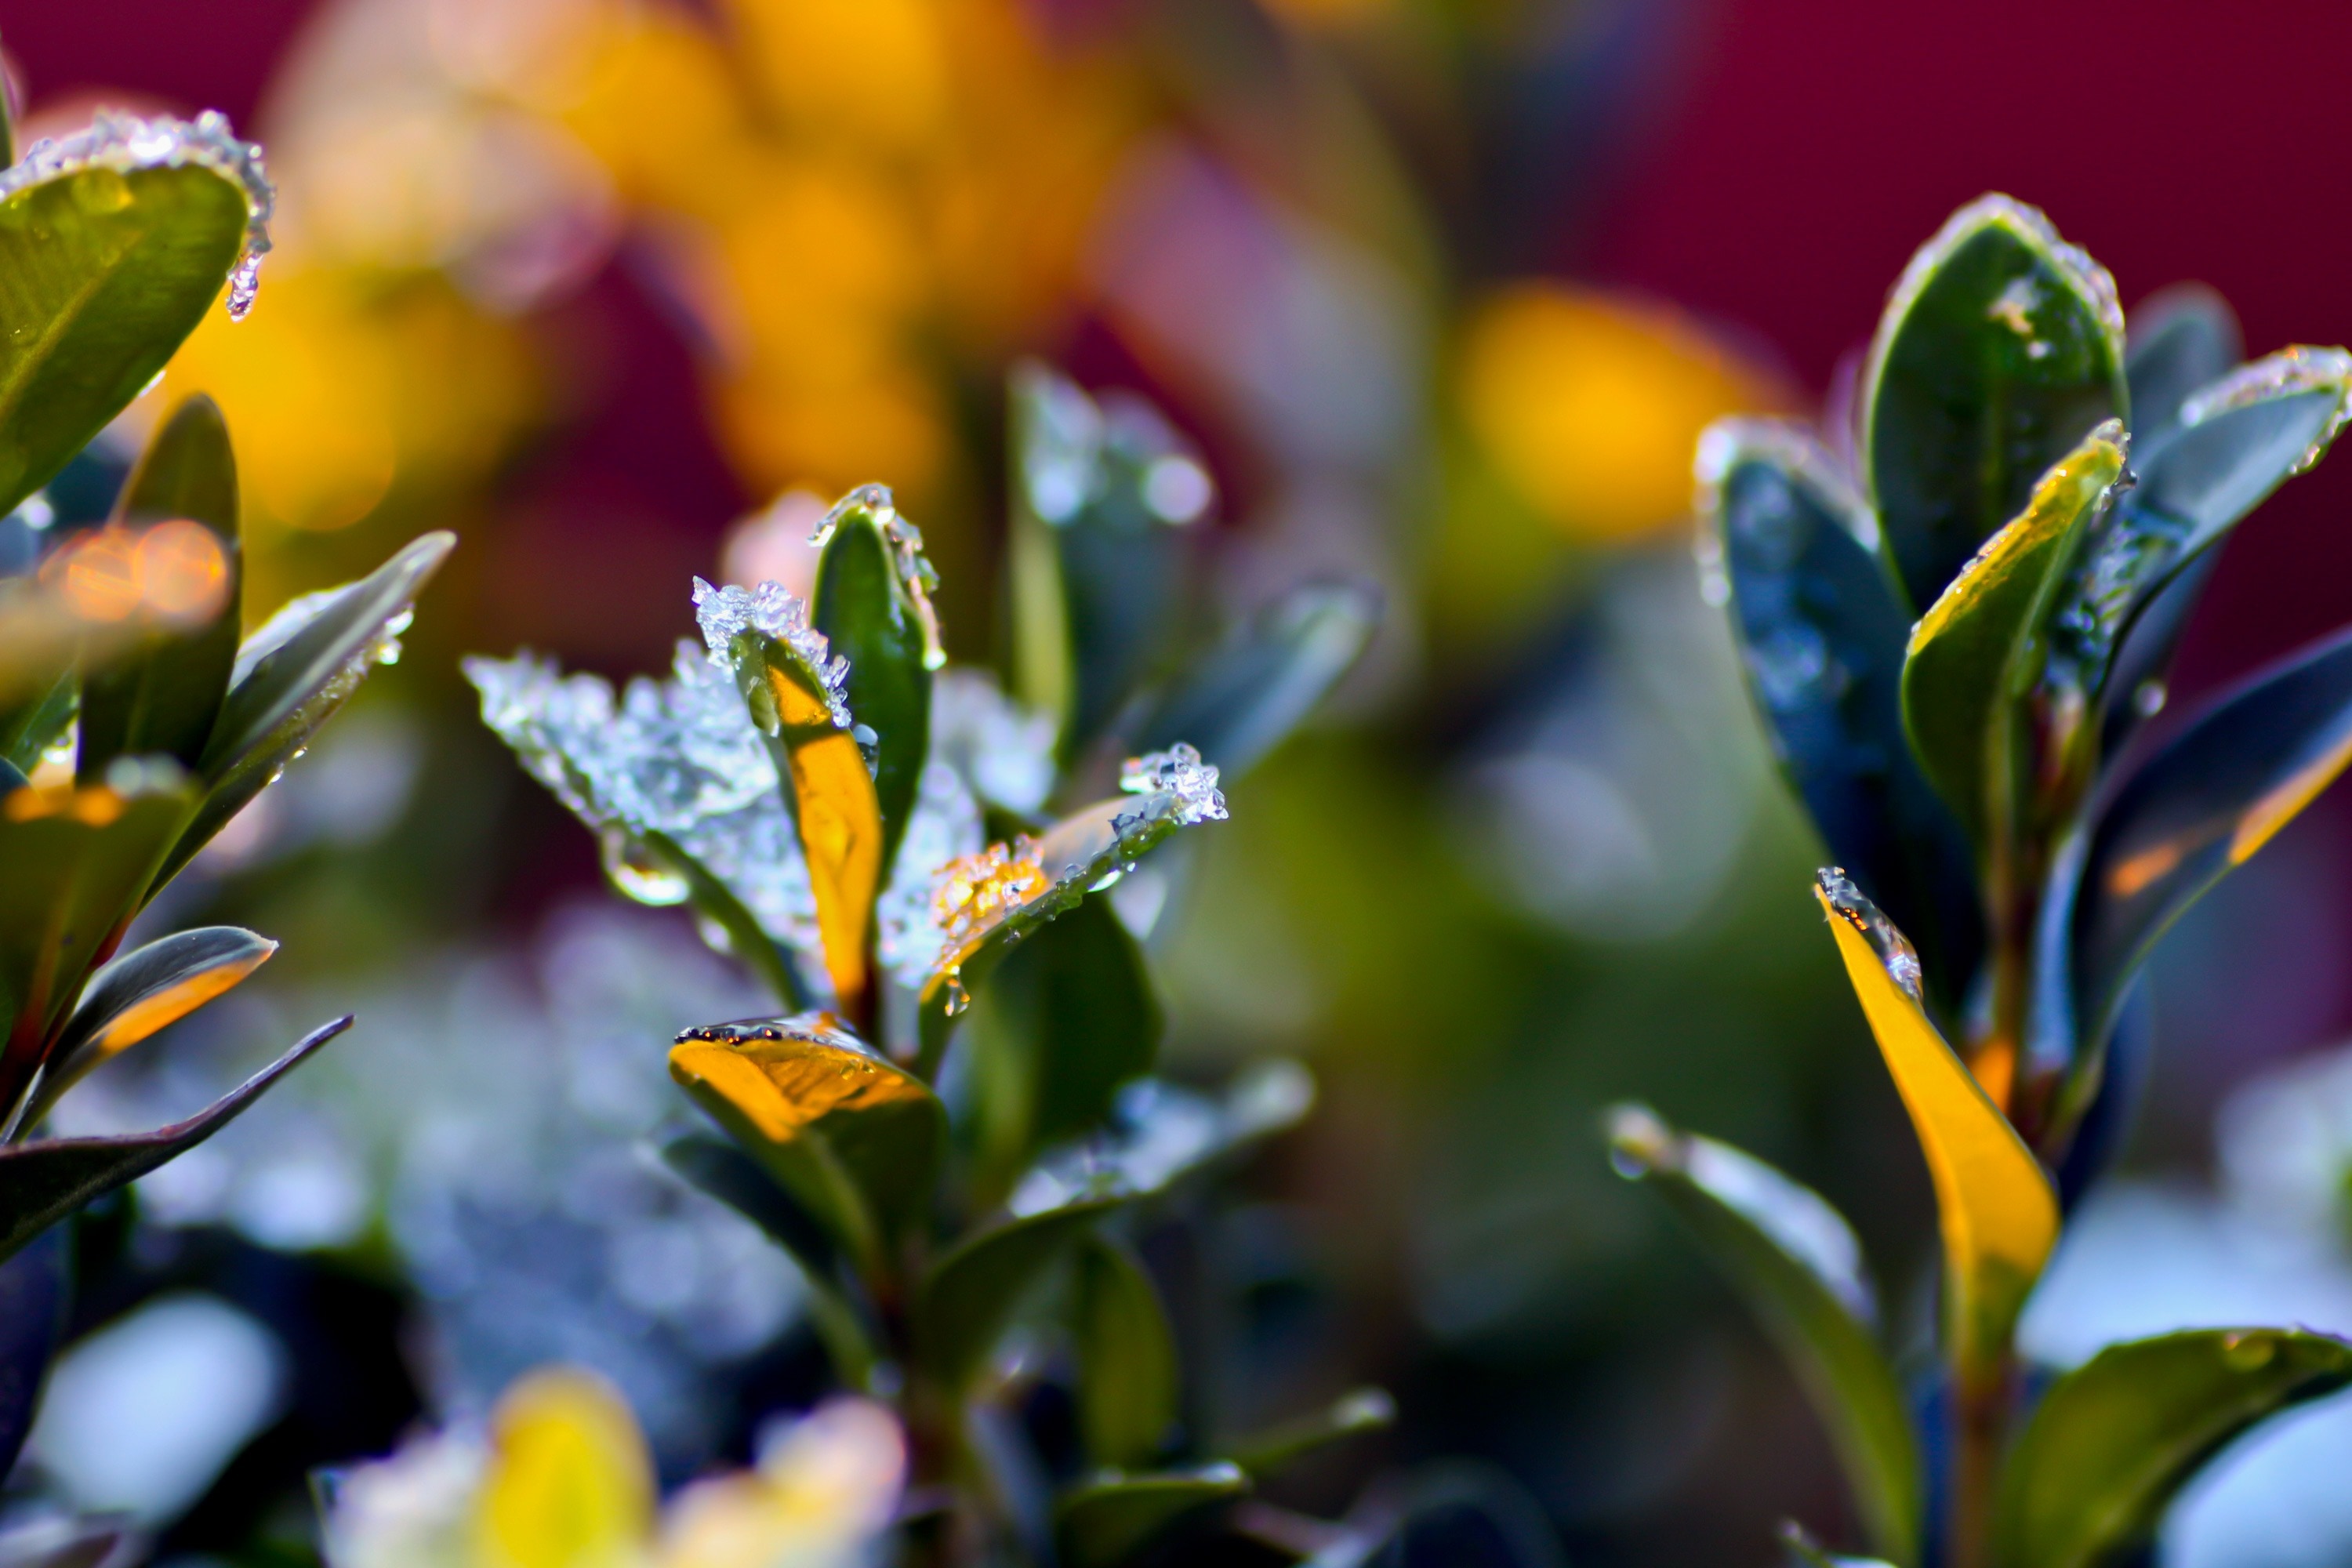 shallow focus photography of green and yellow outdoor plants under sunny sky